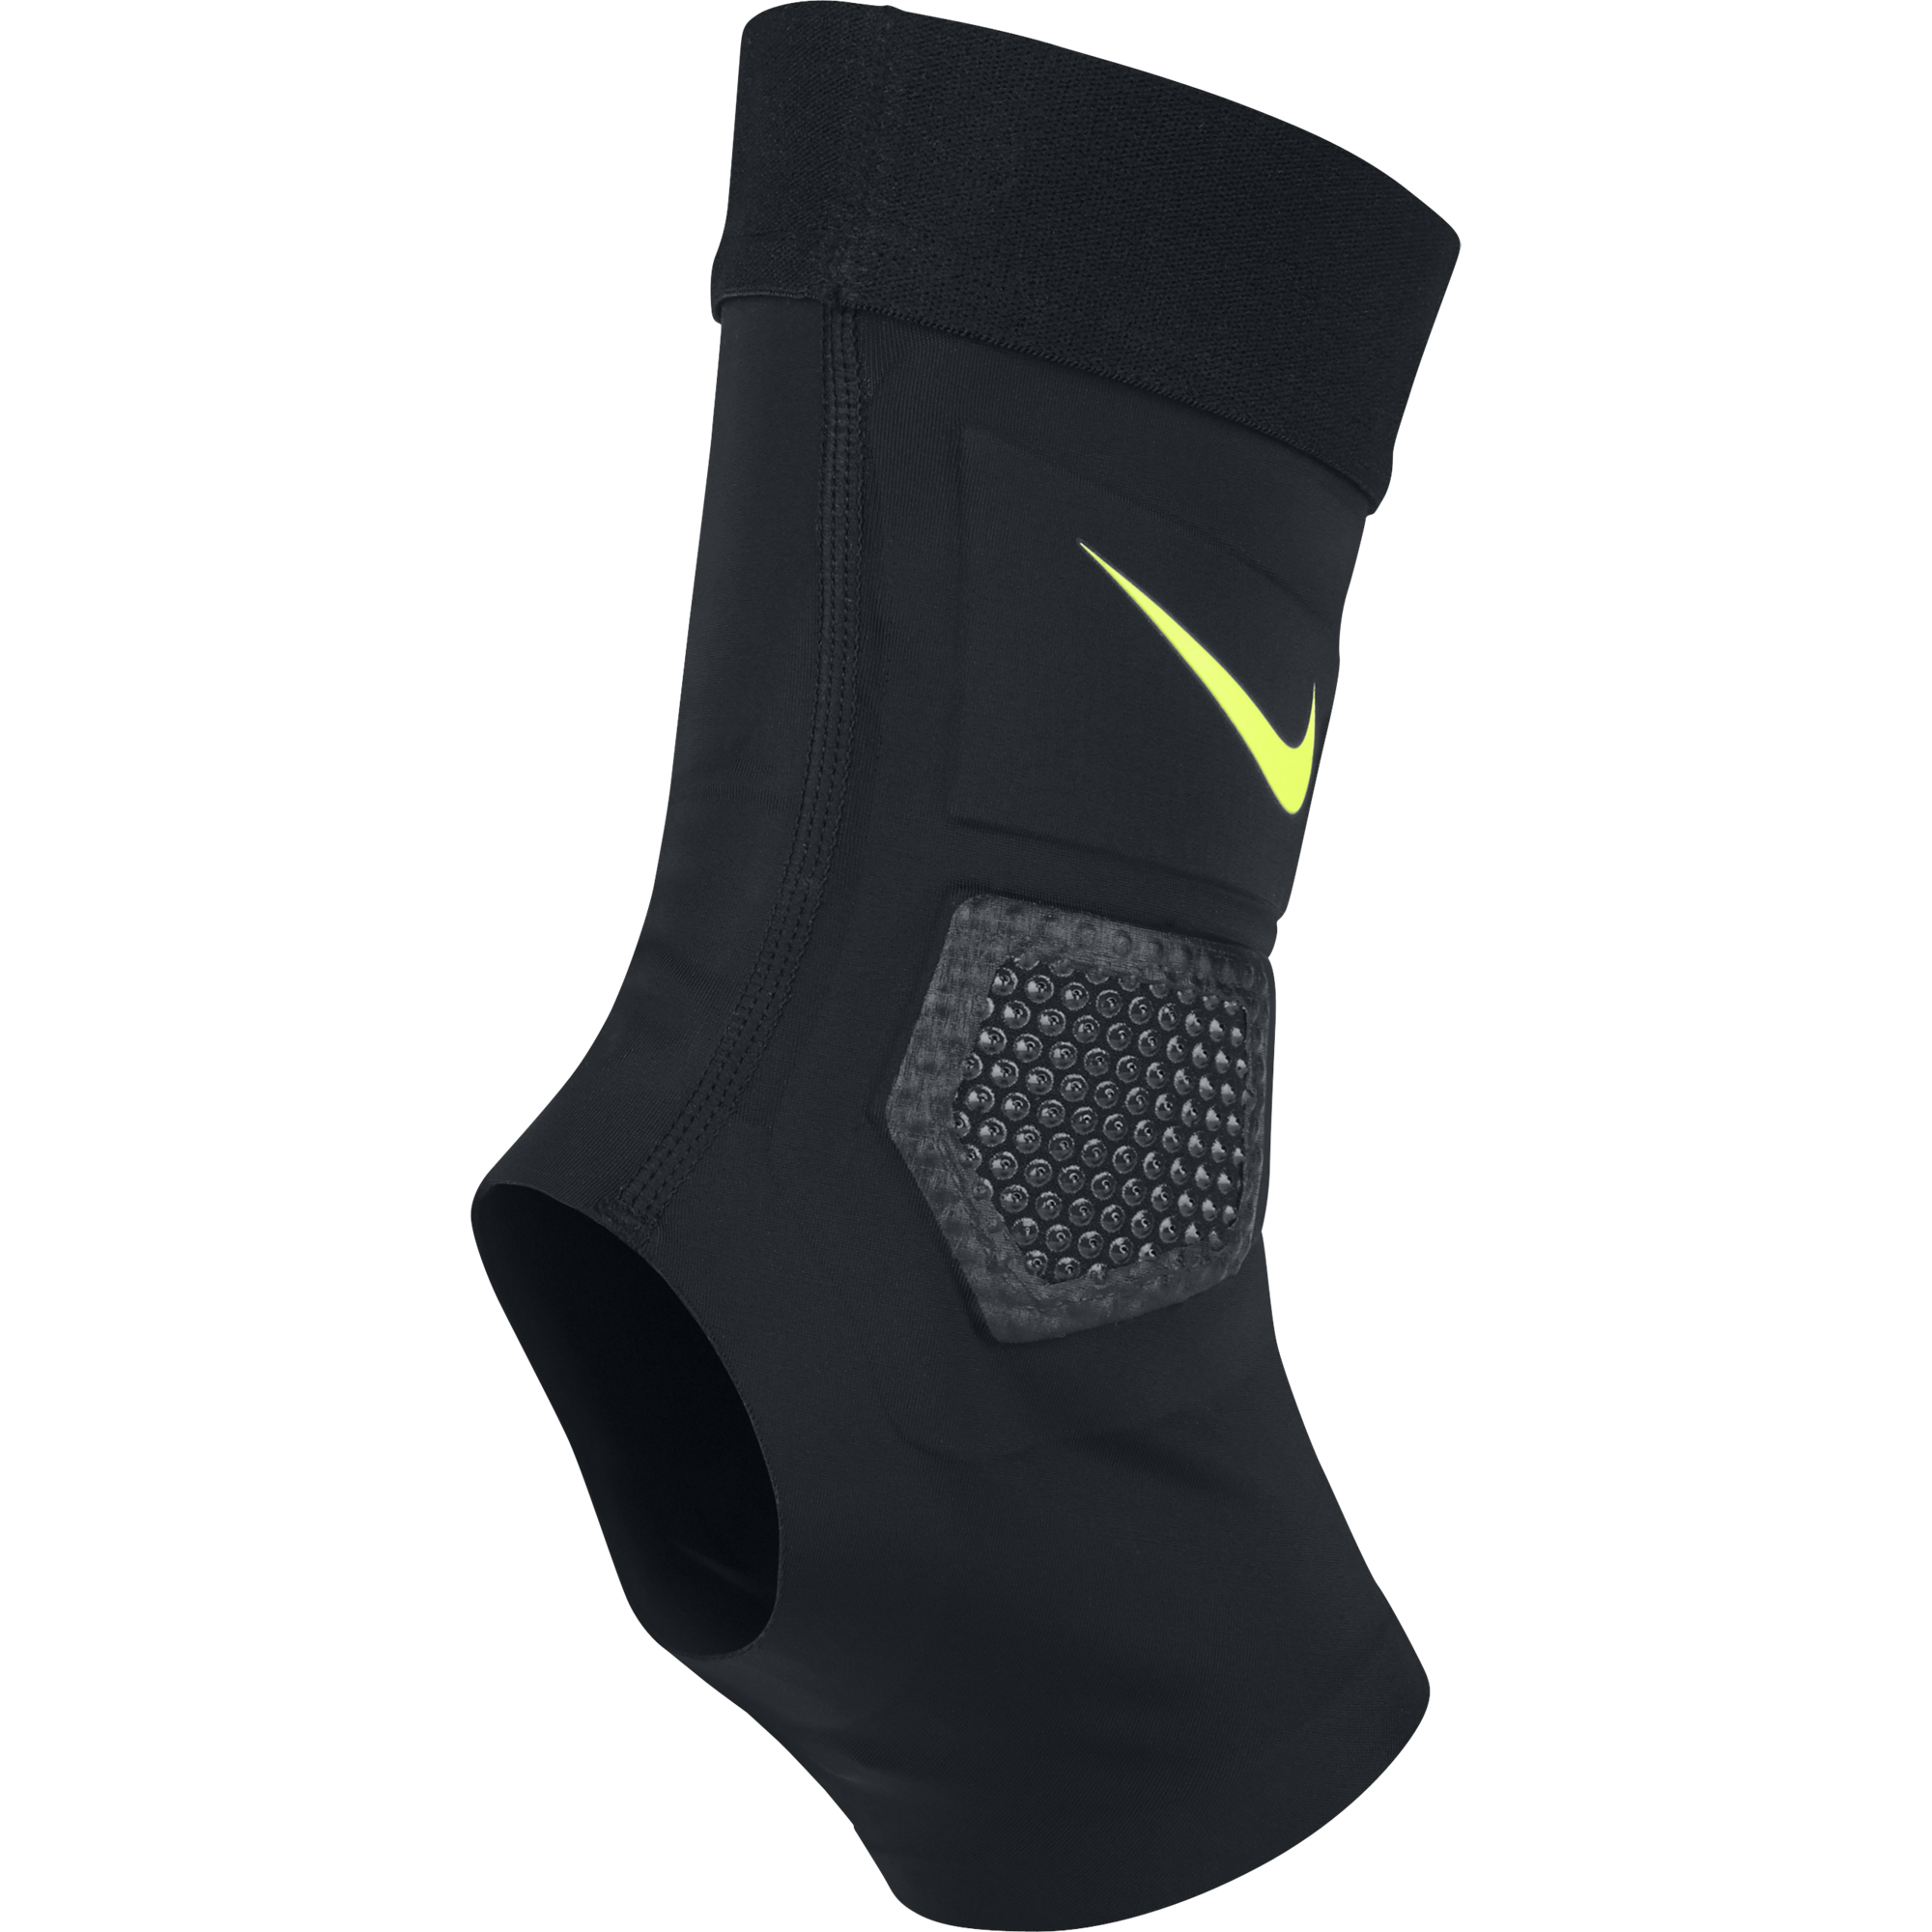 nike shin guards with ankle protection